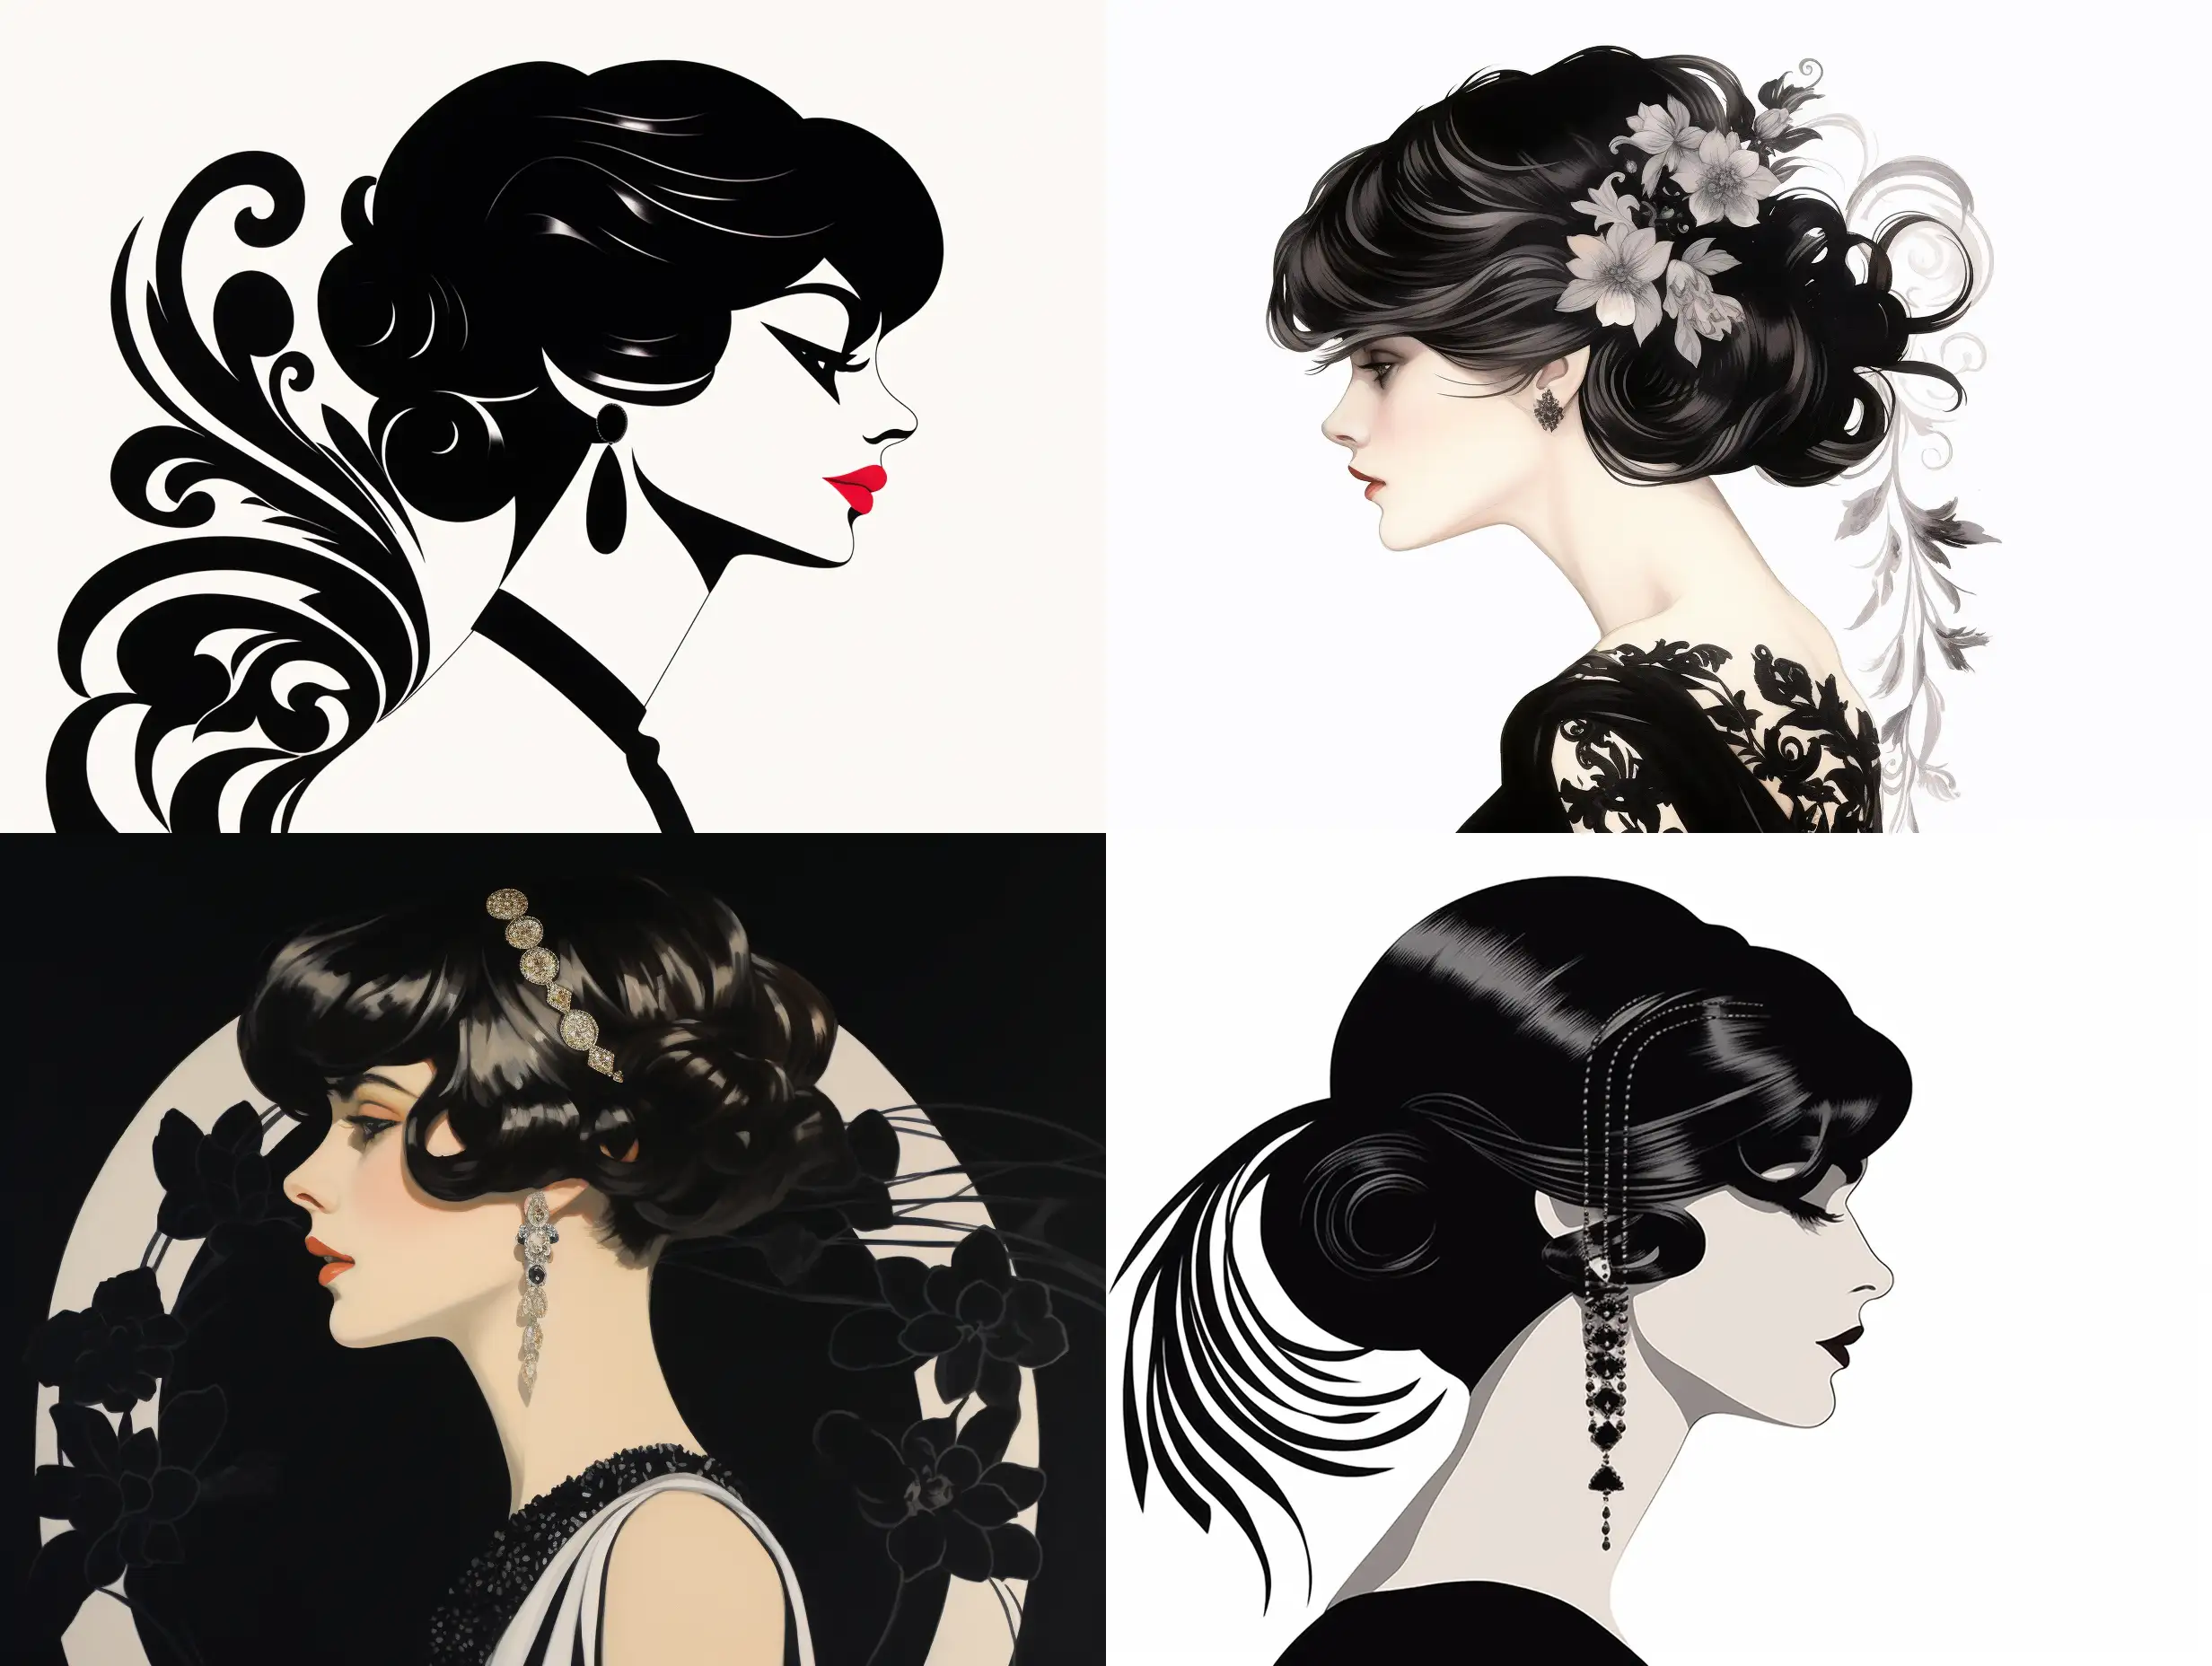 Elegant-Profile-Portrait-of-MiddleAged-Coco-Chanel-in-Signature-Black-Dress-and-Accessories